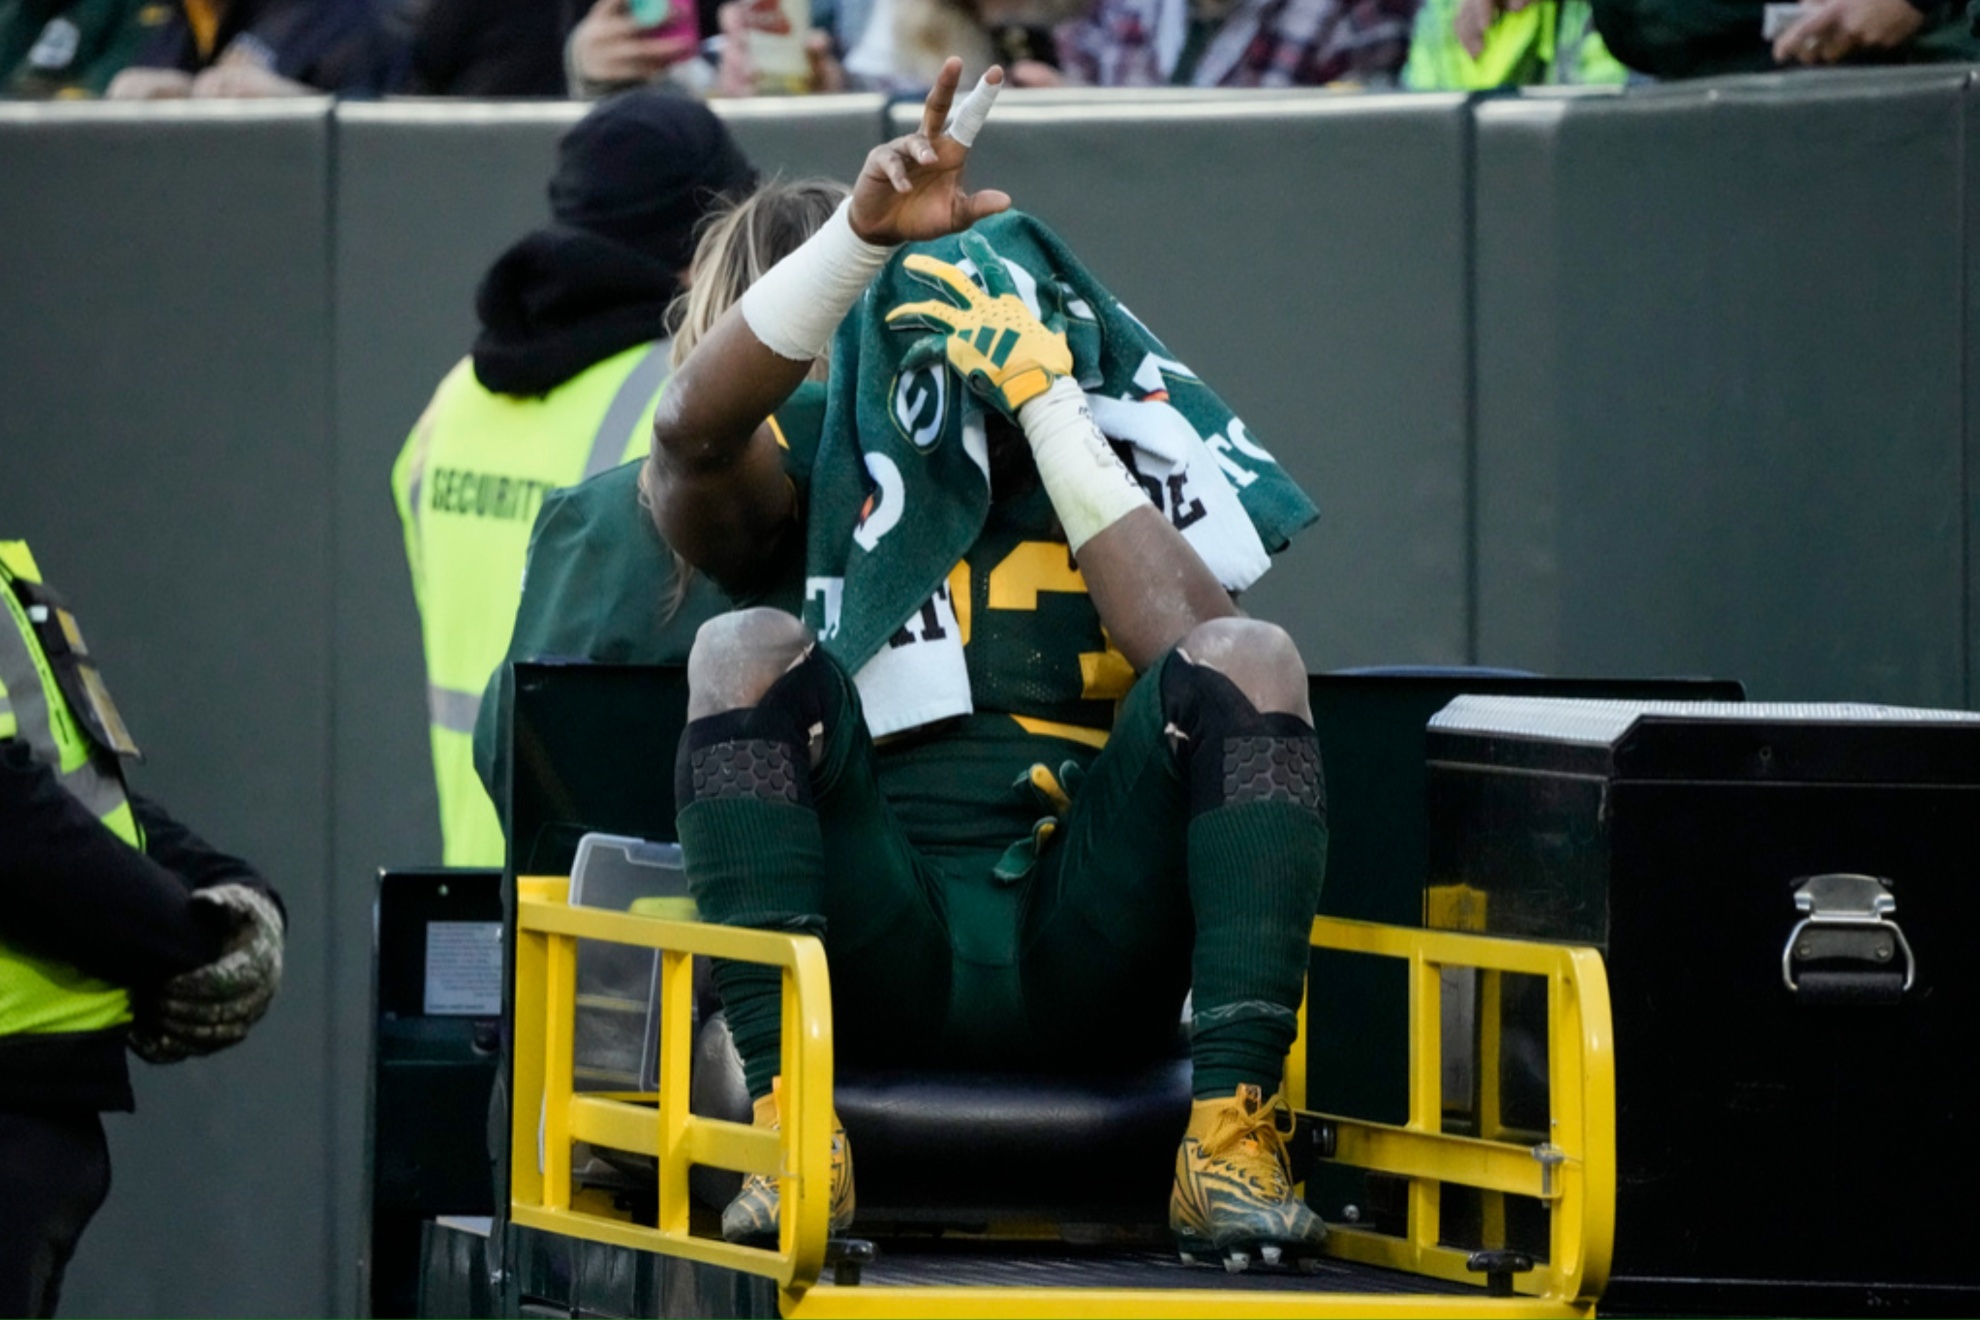 Packers running back Aaron Jones left the game with a left knee injury